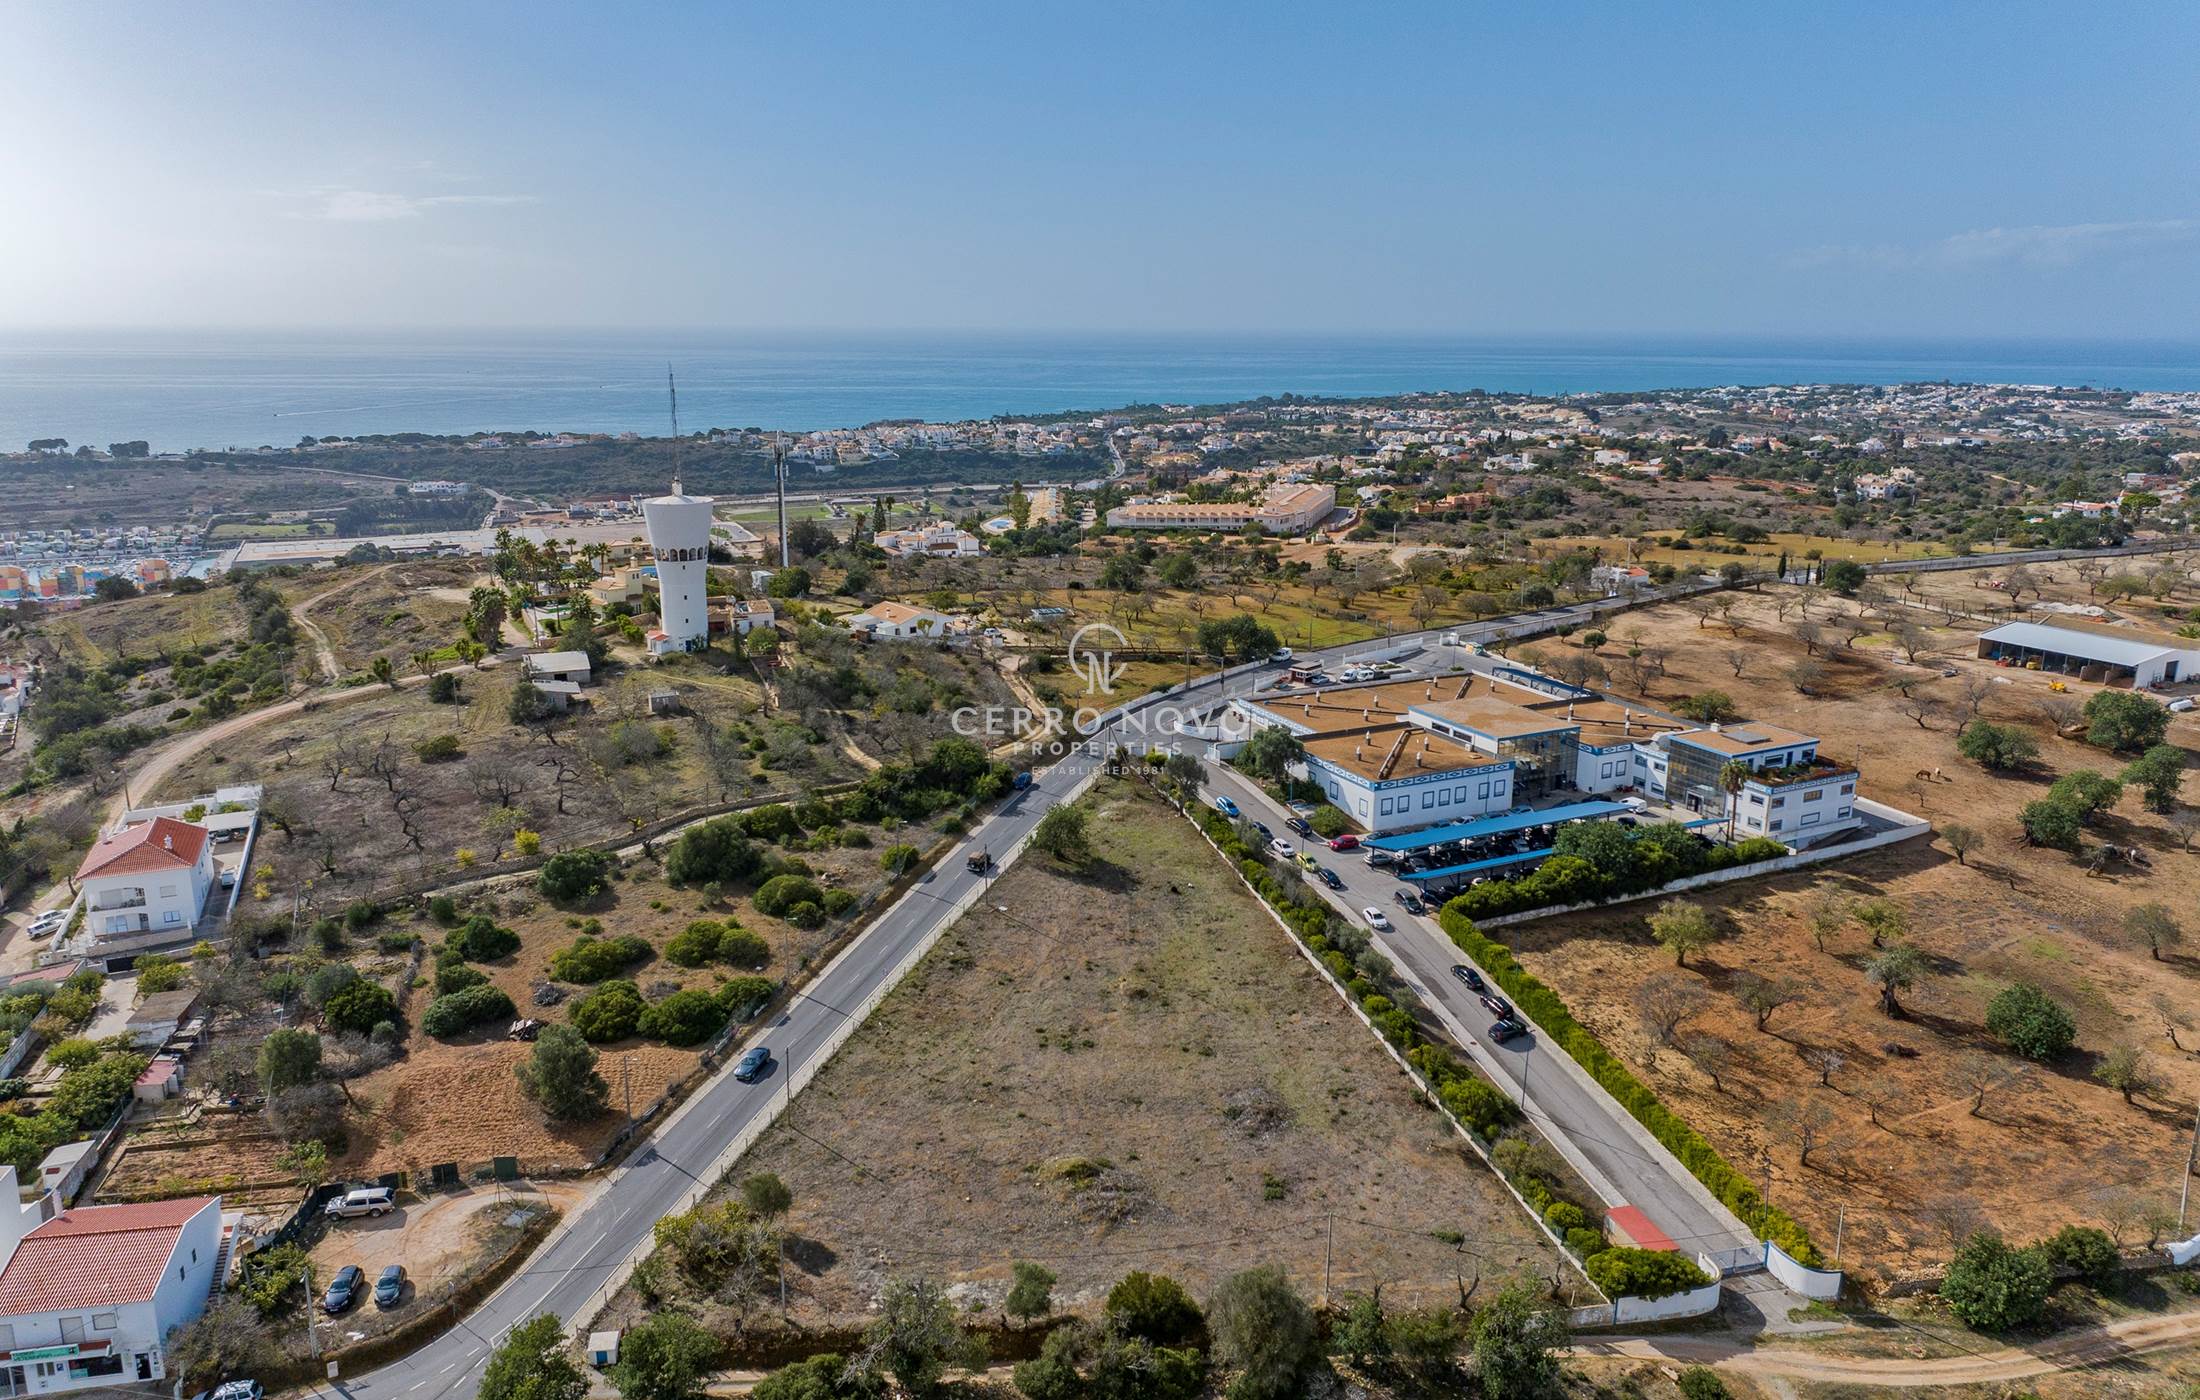 A Central Commercial Development Opportunity for Motorhomes in Albufeira